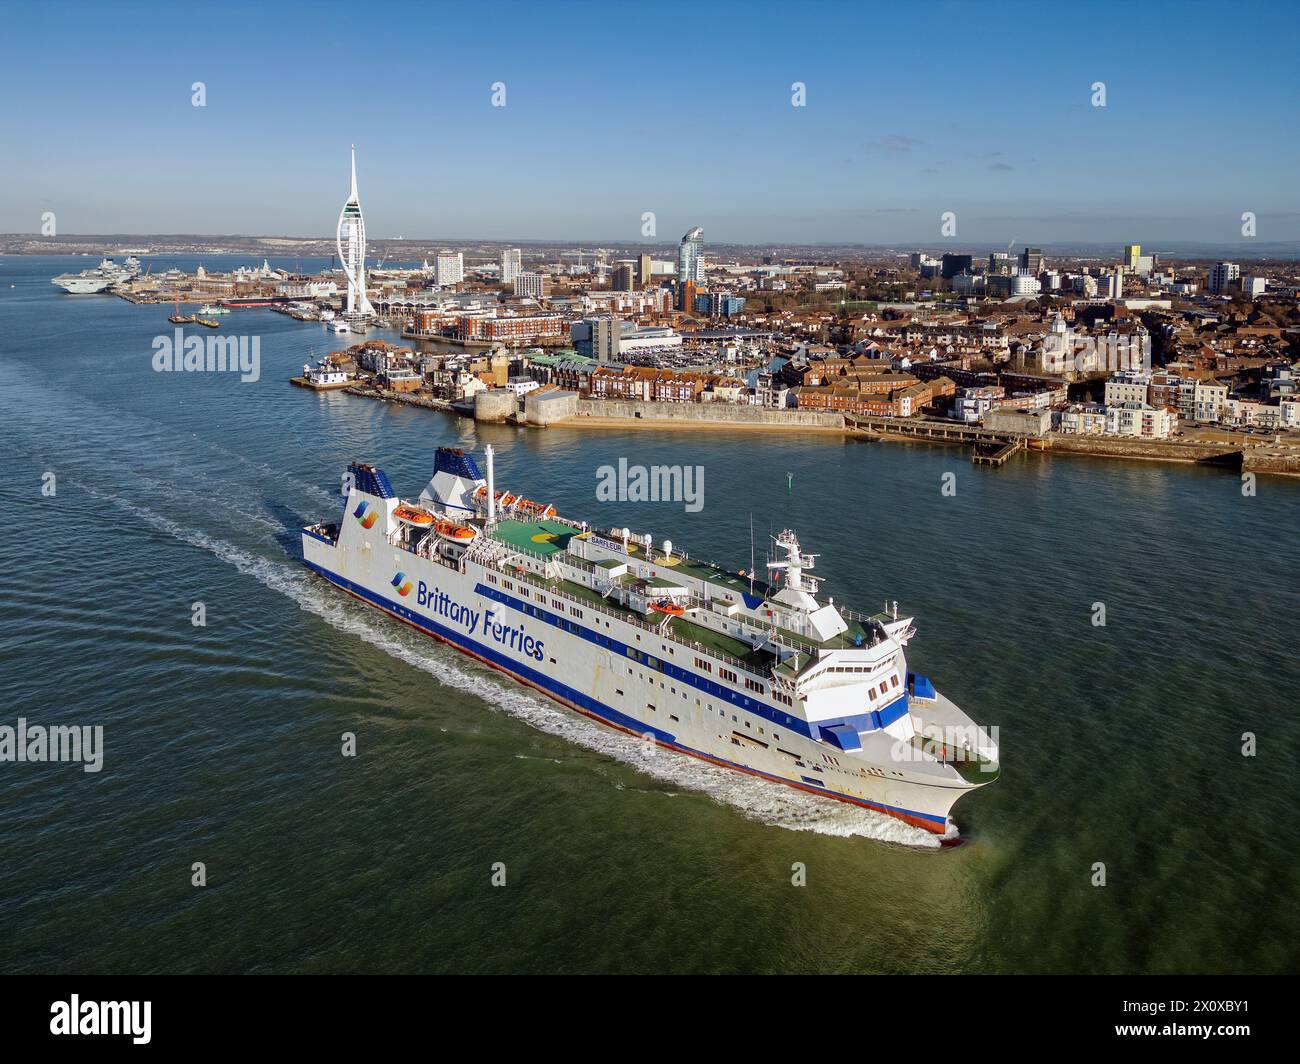 Barfleur is a cross-Channel ferry mainly operated by Brittany Ferries between Poole and Cherbourg. Stock Photo